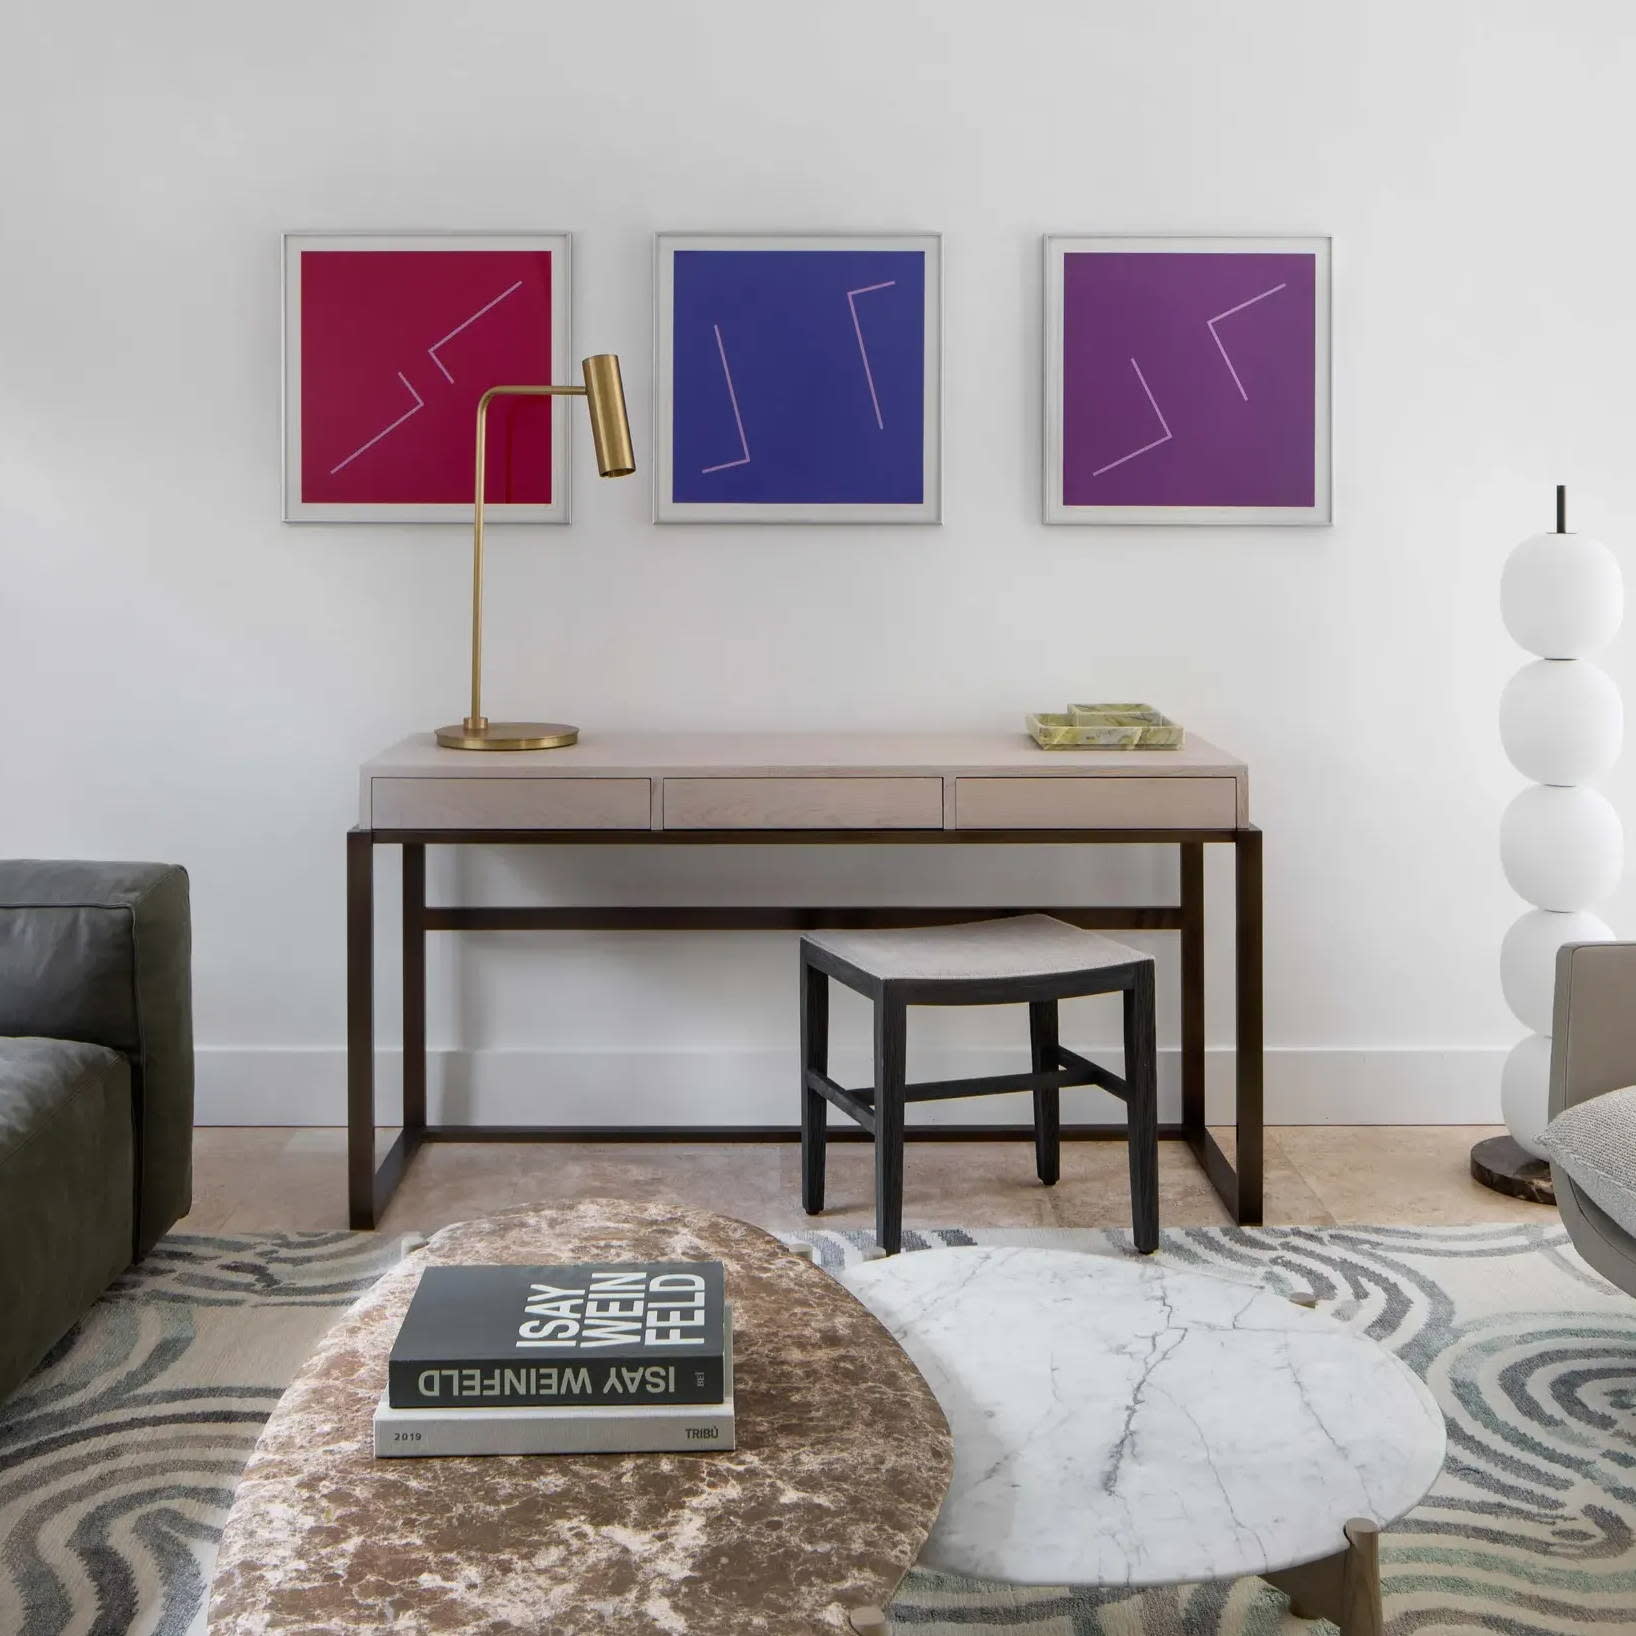 Prints by Maximilian Weishaupt installed in our Miami Bungalow